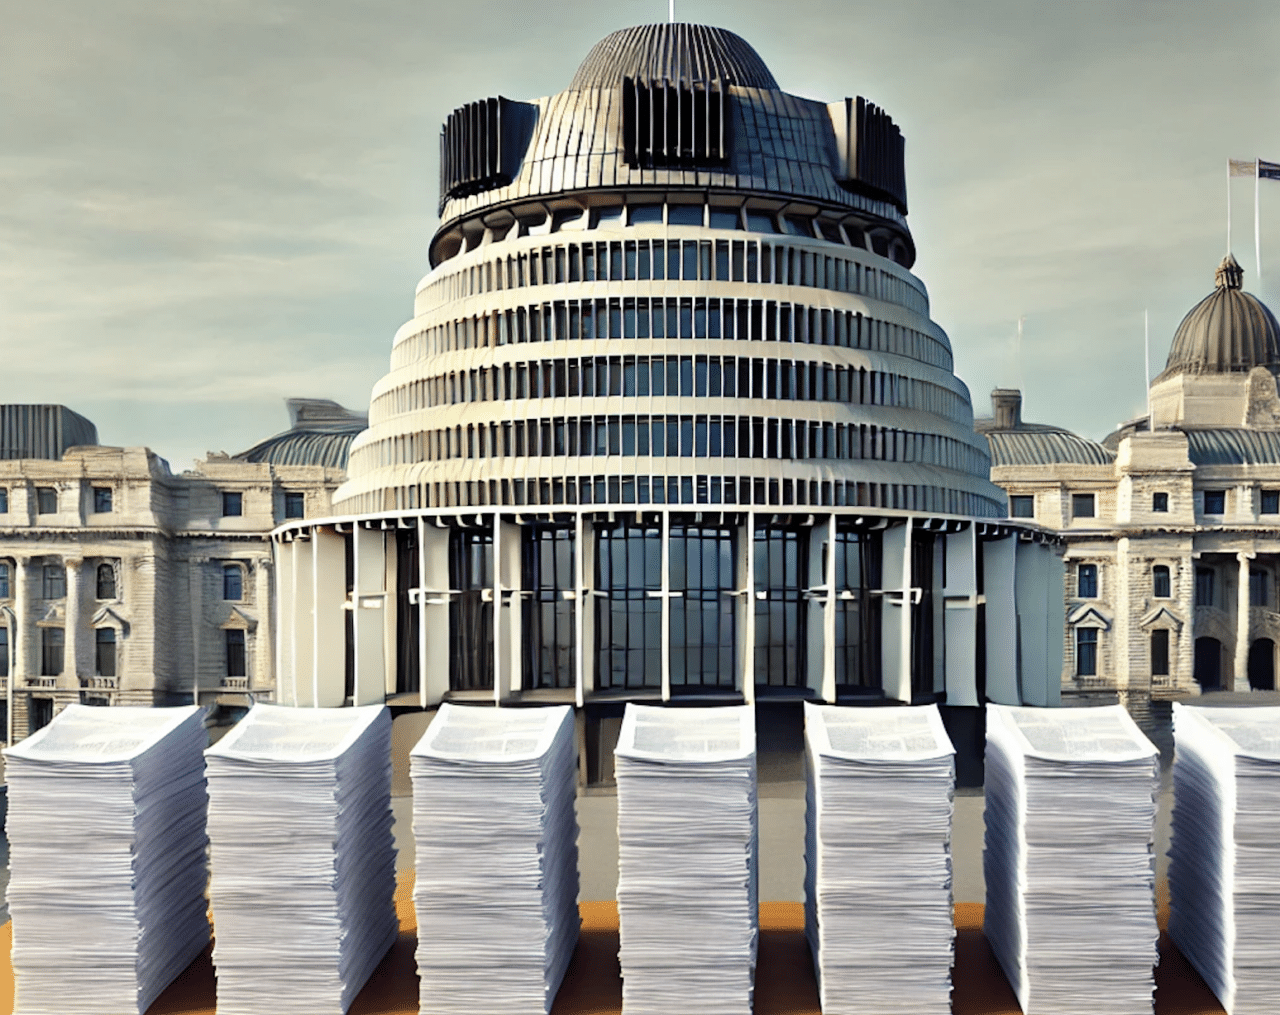 The beehive with stacks of manifestos in front of it